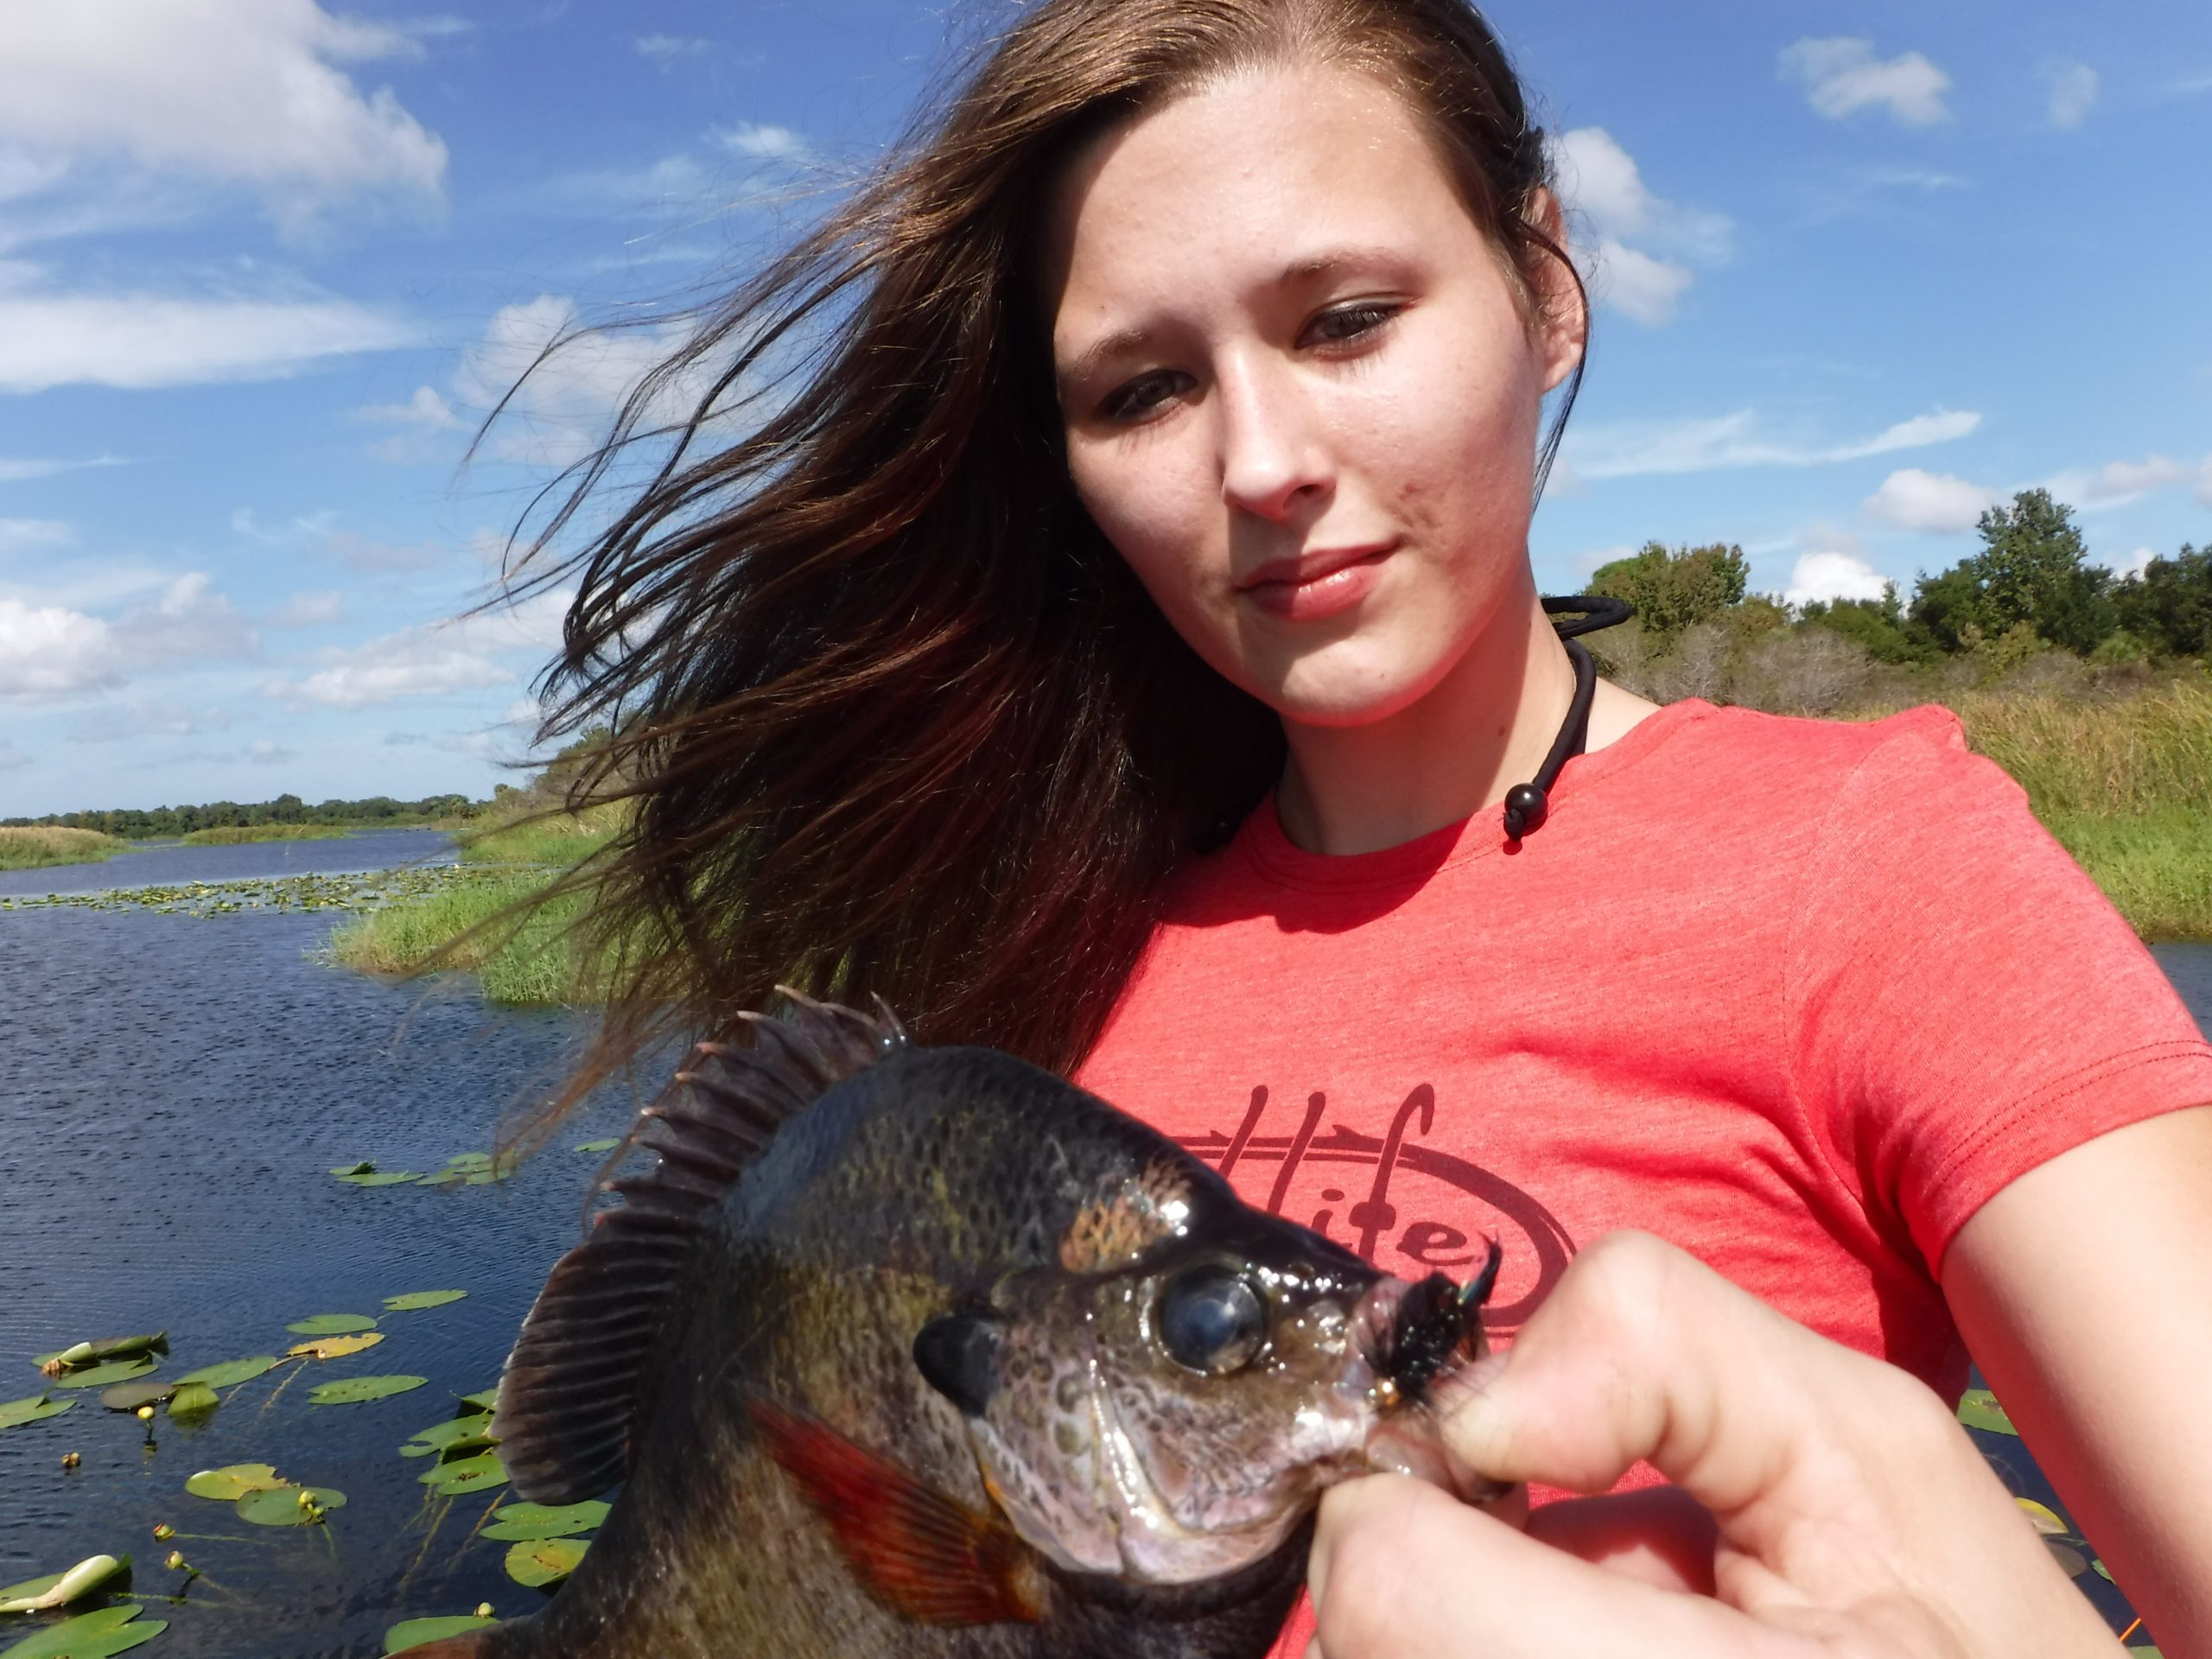 Introduction to Bluegill Fishing Tips